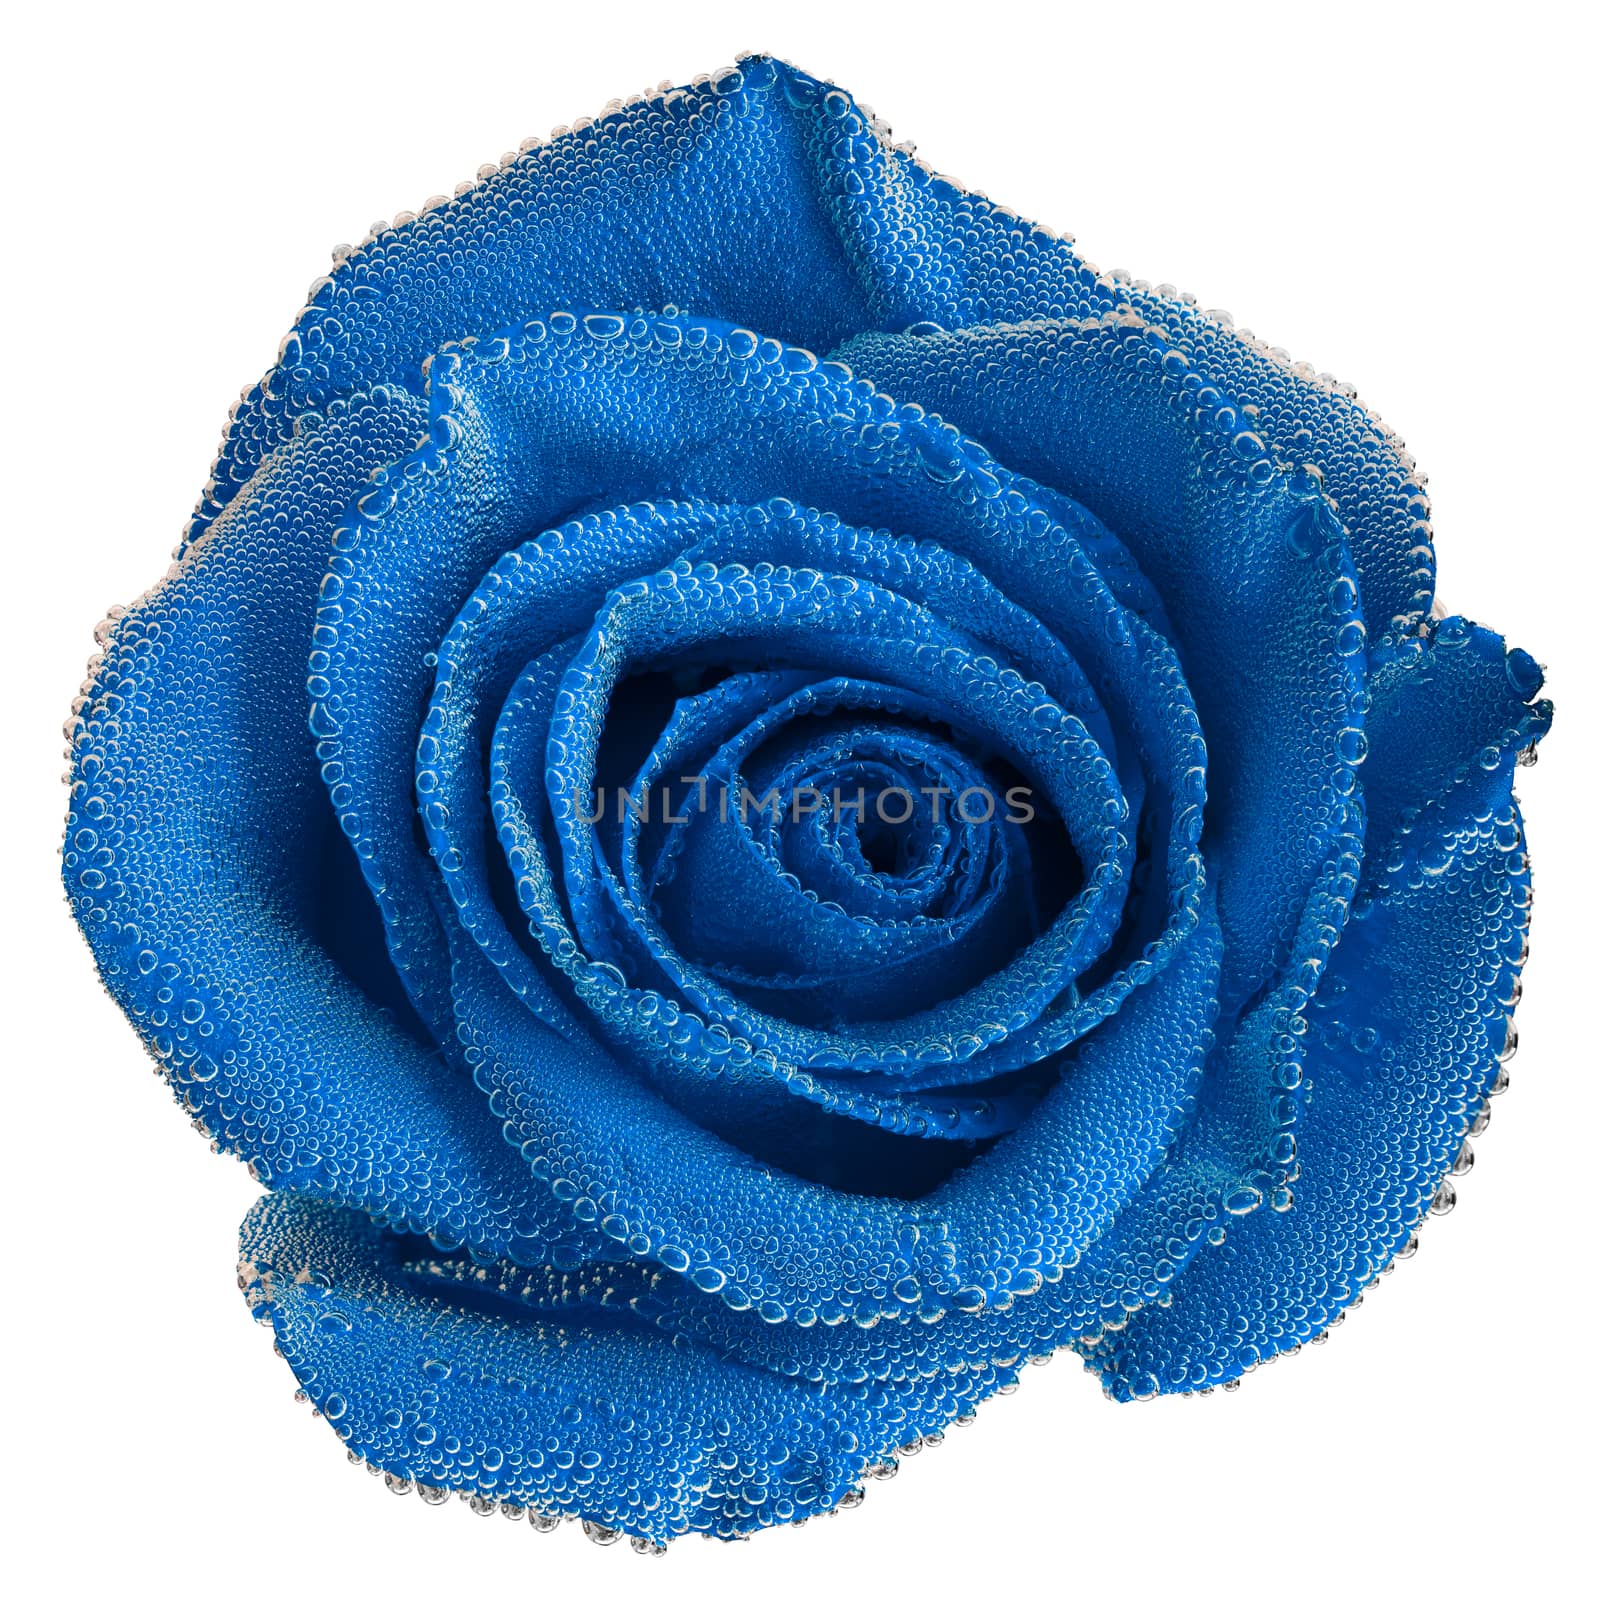 A blue rose under air bubbles close-up isolated on white background by z1b